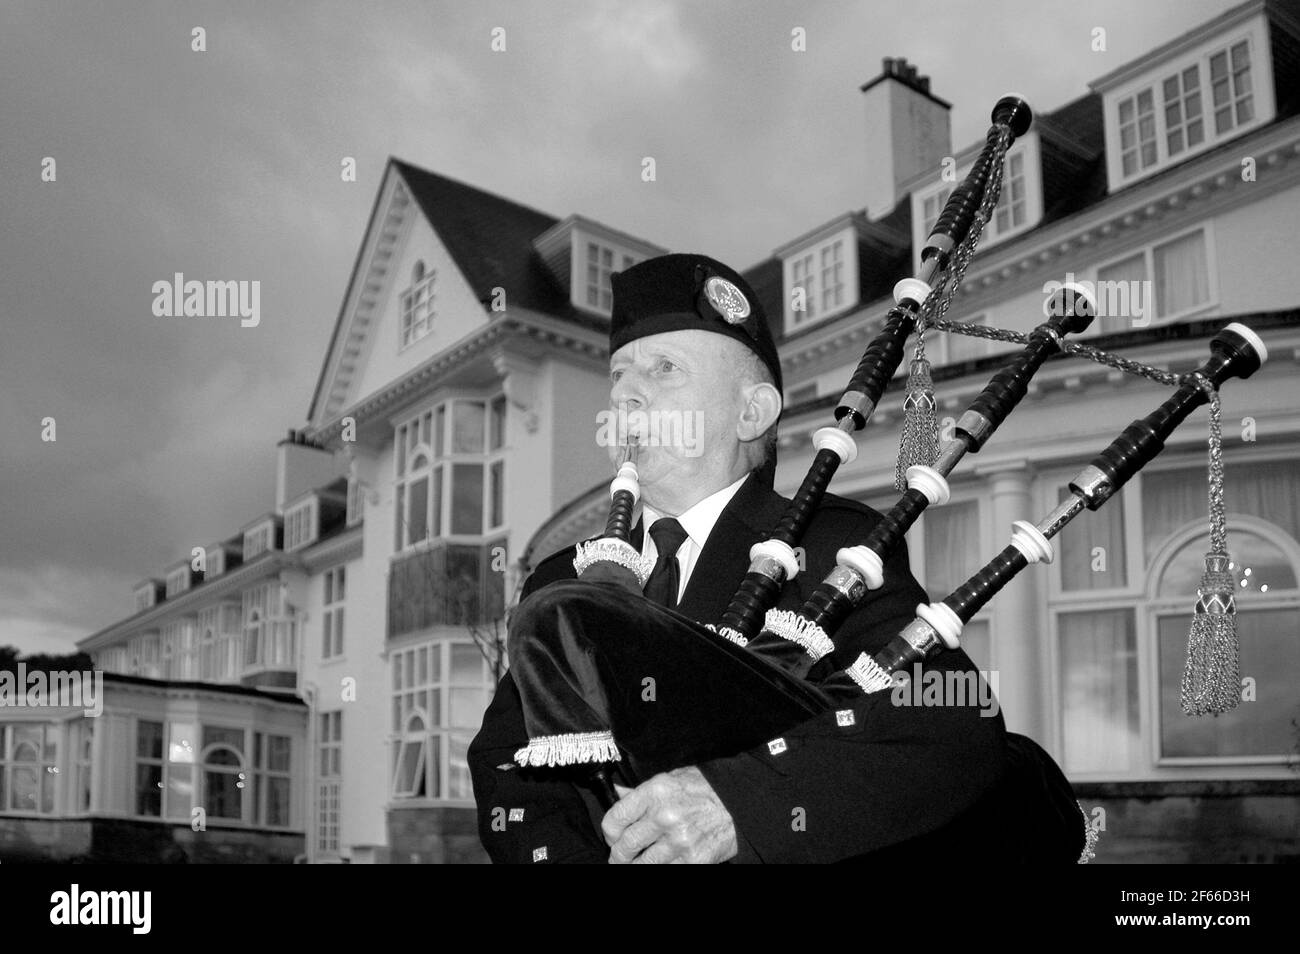 Trump Turnberry: Bagpiper playing the bagpipes at Turnberry Resort in Scotland Stock Photo